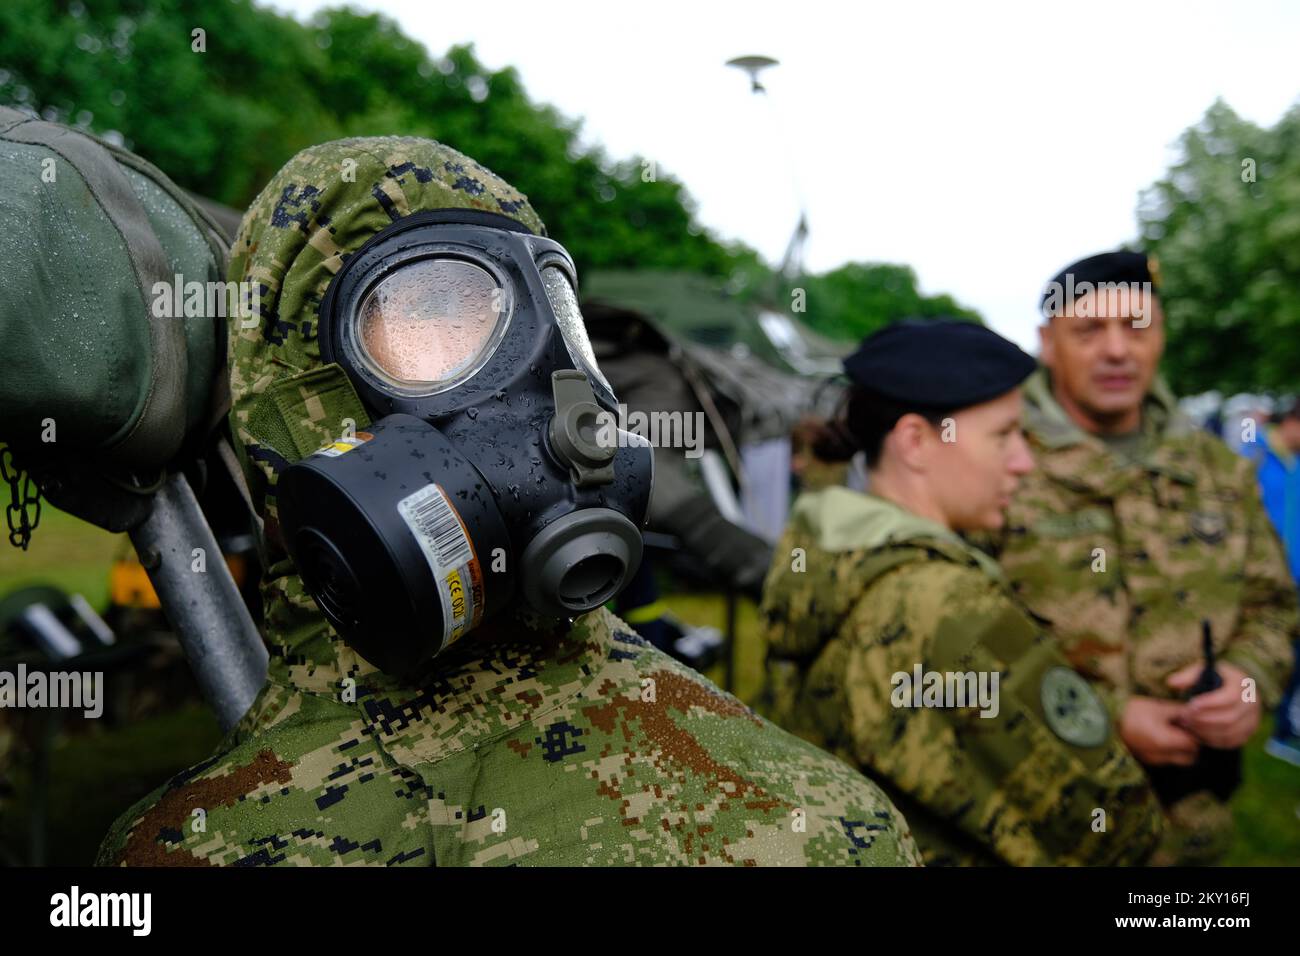 On the occasion of the celebration of the Day of the Croatian Army and the 31st anniversary of the Croatian Army, the Tactical and Technical Assembly of Weapons and Equipment and demonstration exercises of Croatian Army members were held by Jarun lake in Zagreb, Croatia on 30. June 2022. Photo: Slaven Branislav babic/PIXSELL Stock Photo